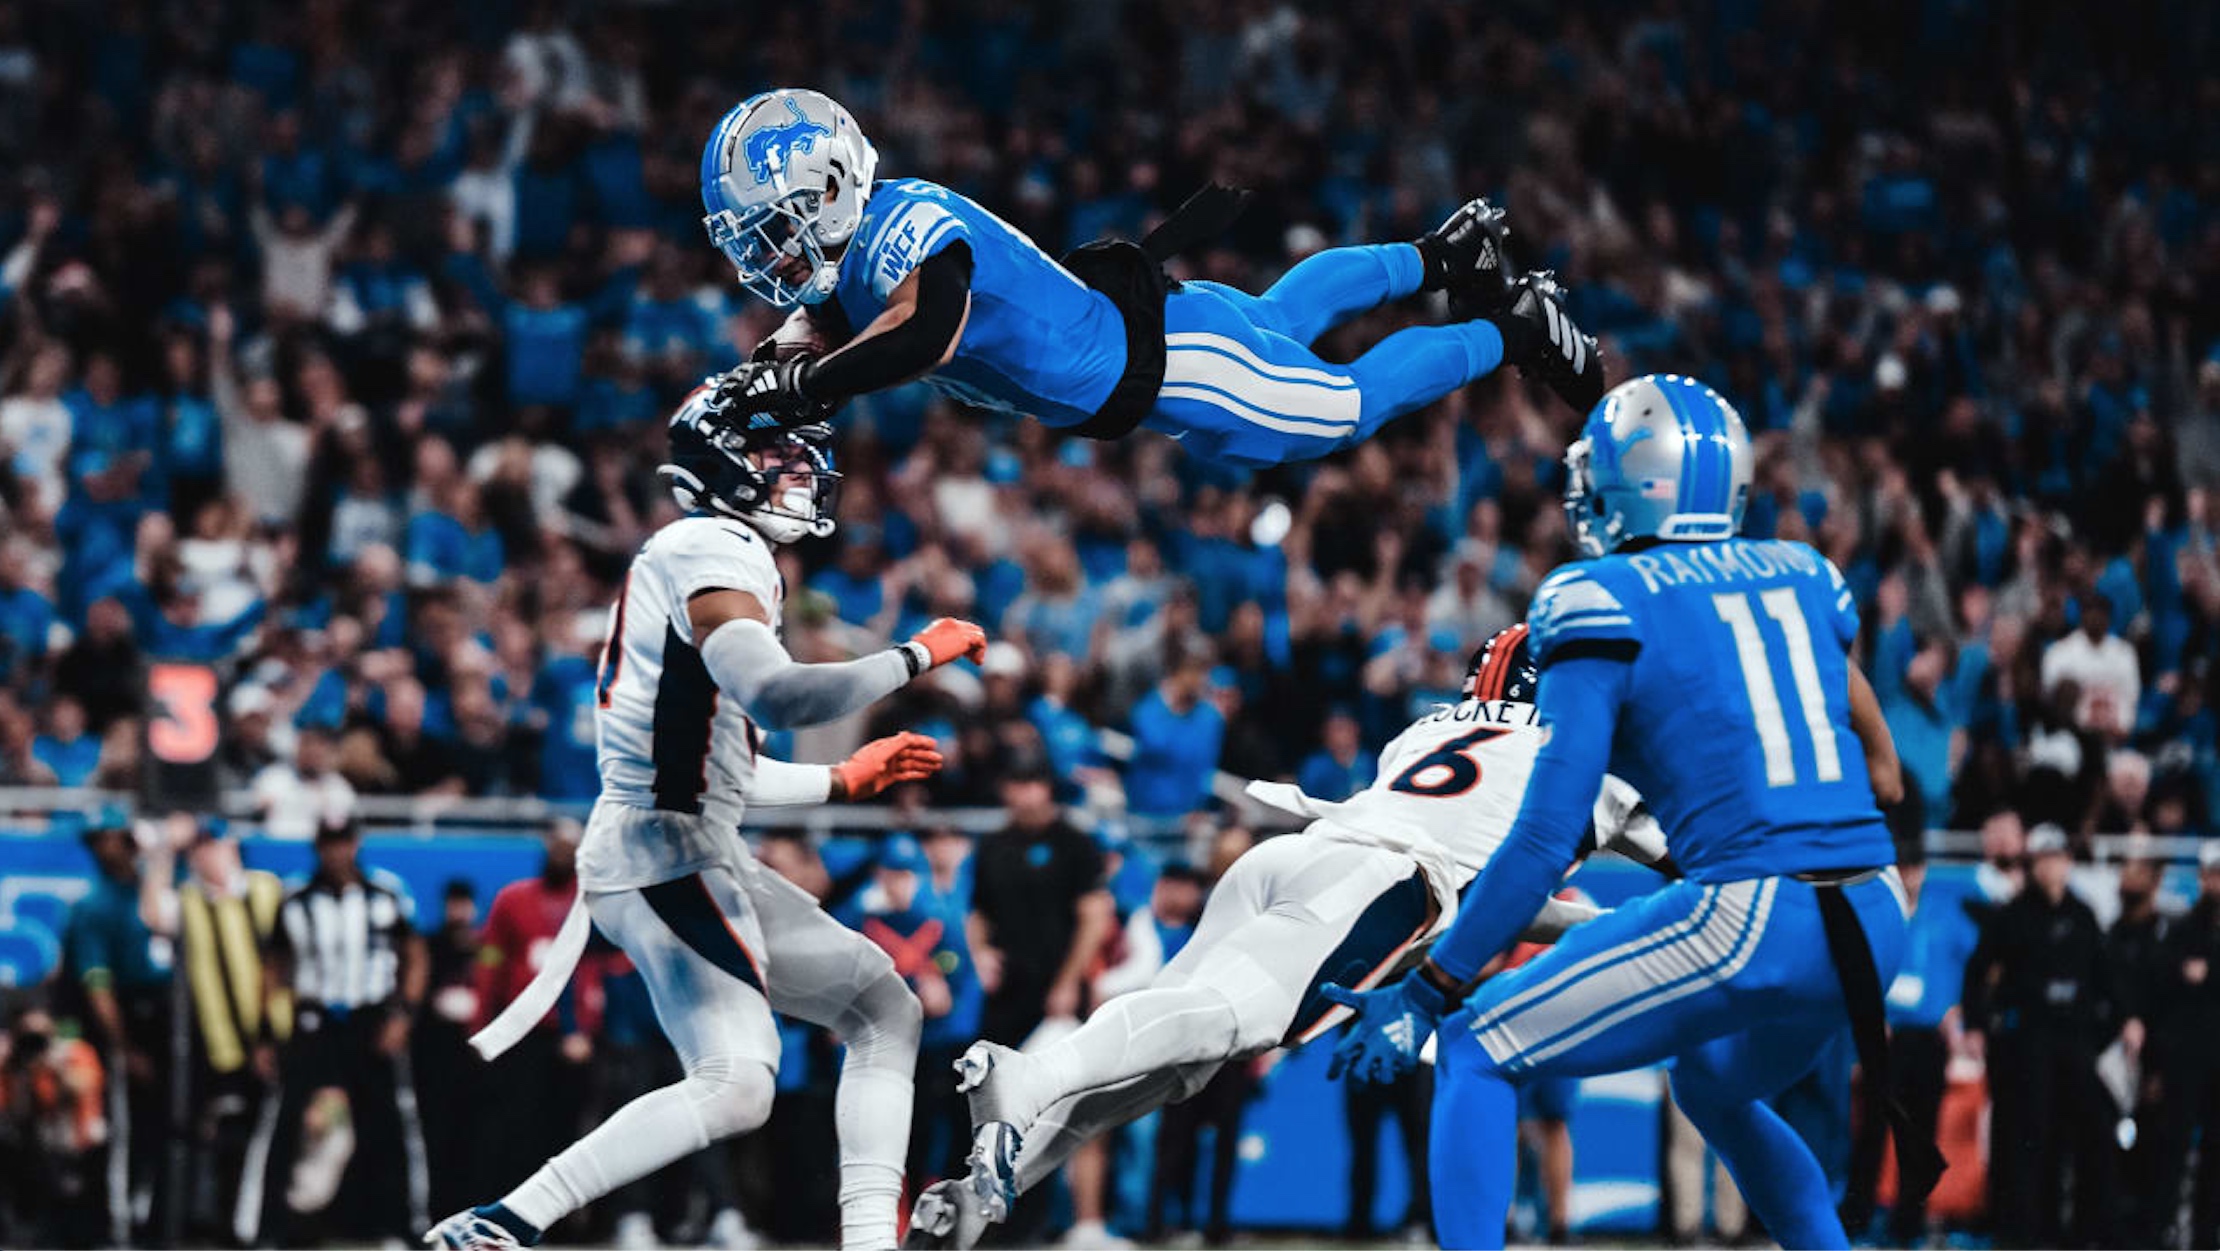 Photo of Lions receiver Amon-Ra St. Brown jumping over Broncos defenders for a touchdown courtesy Detroit Lions